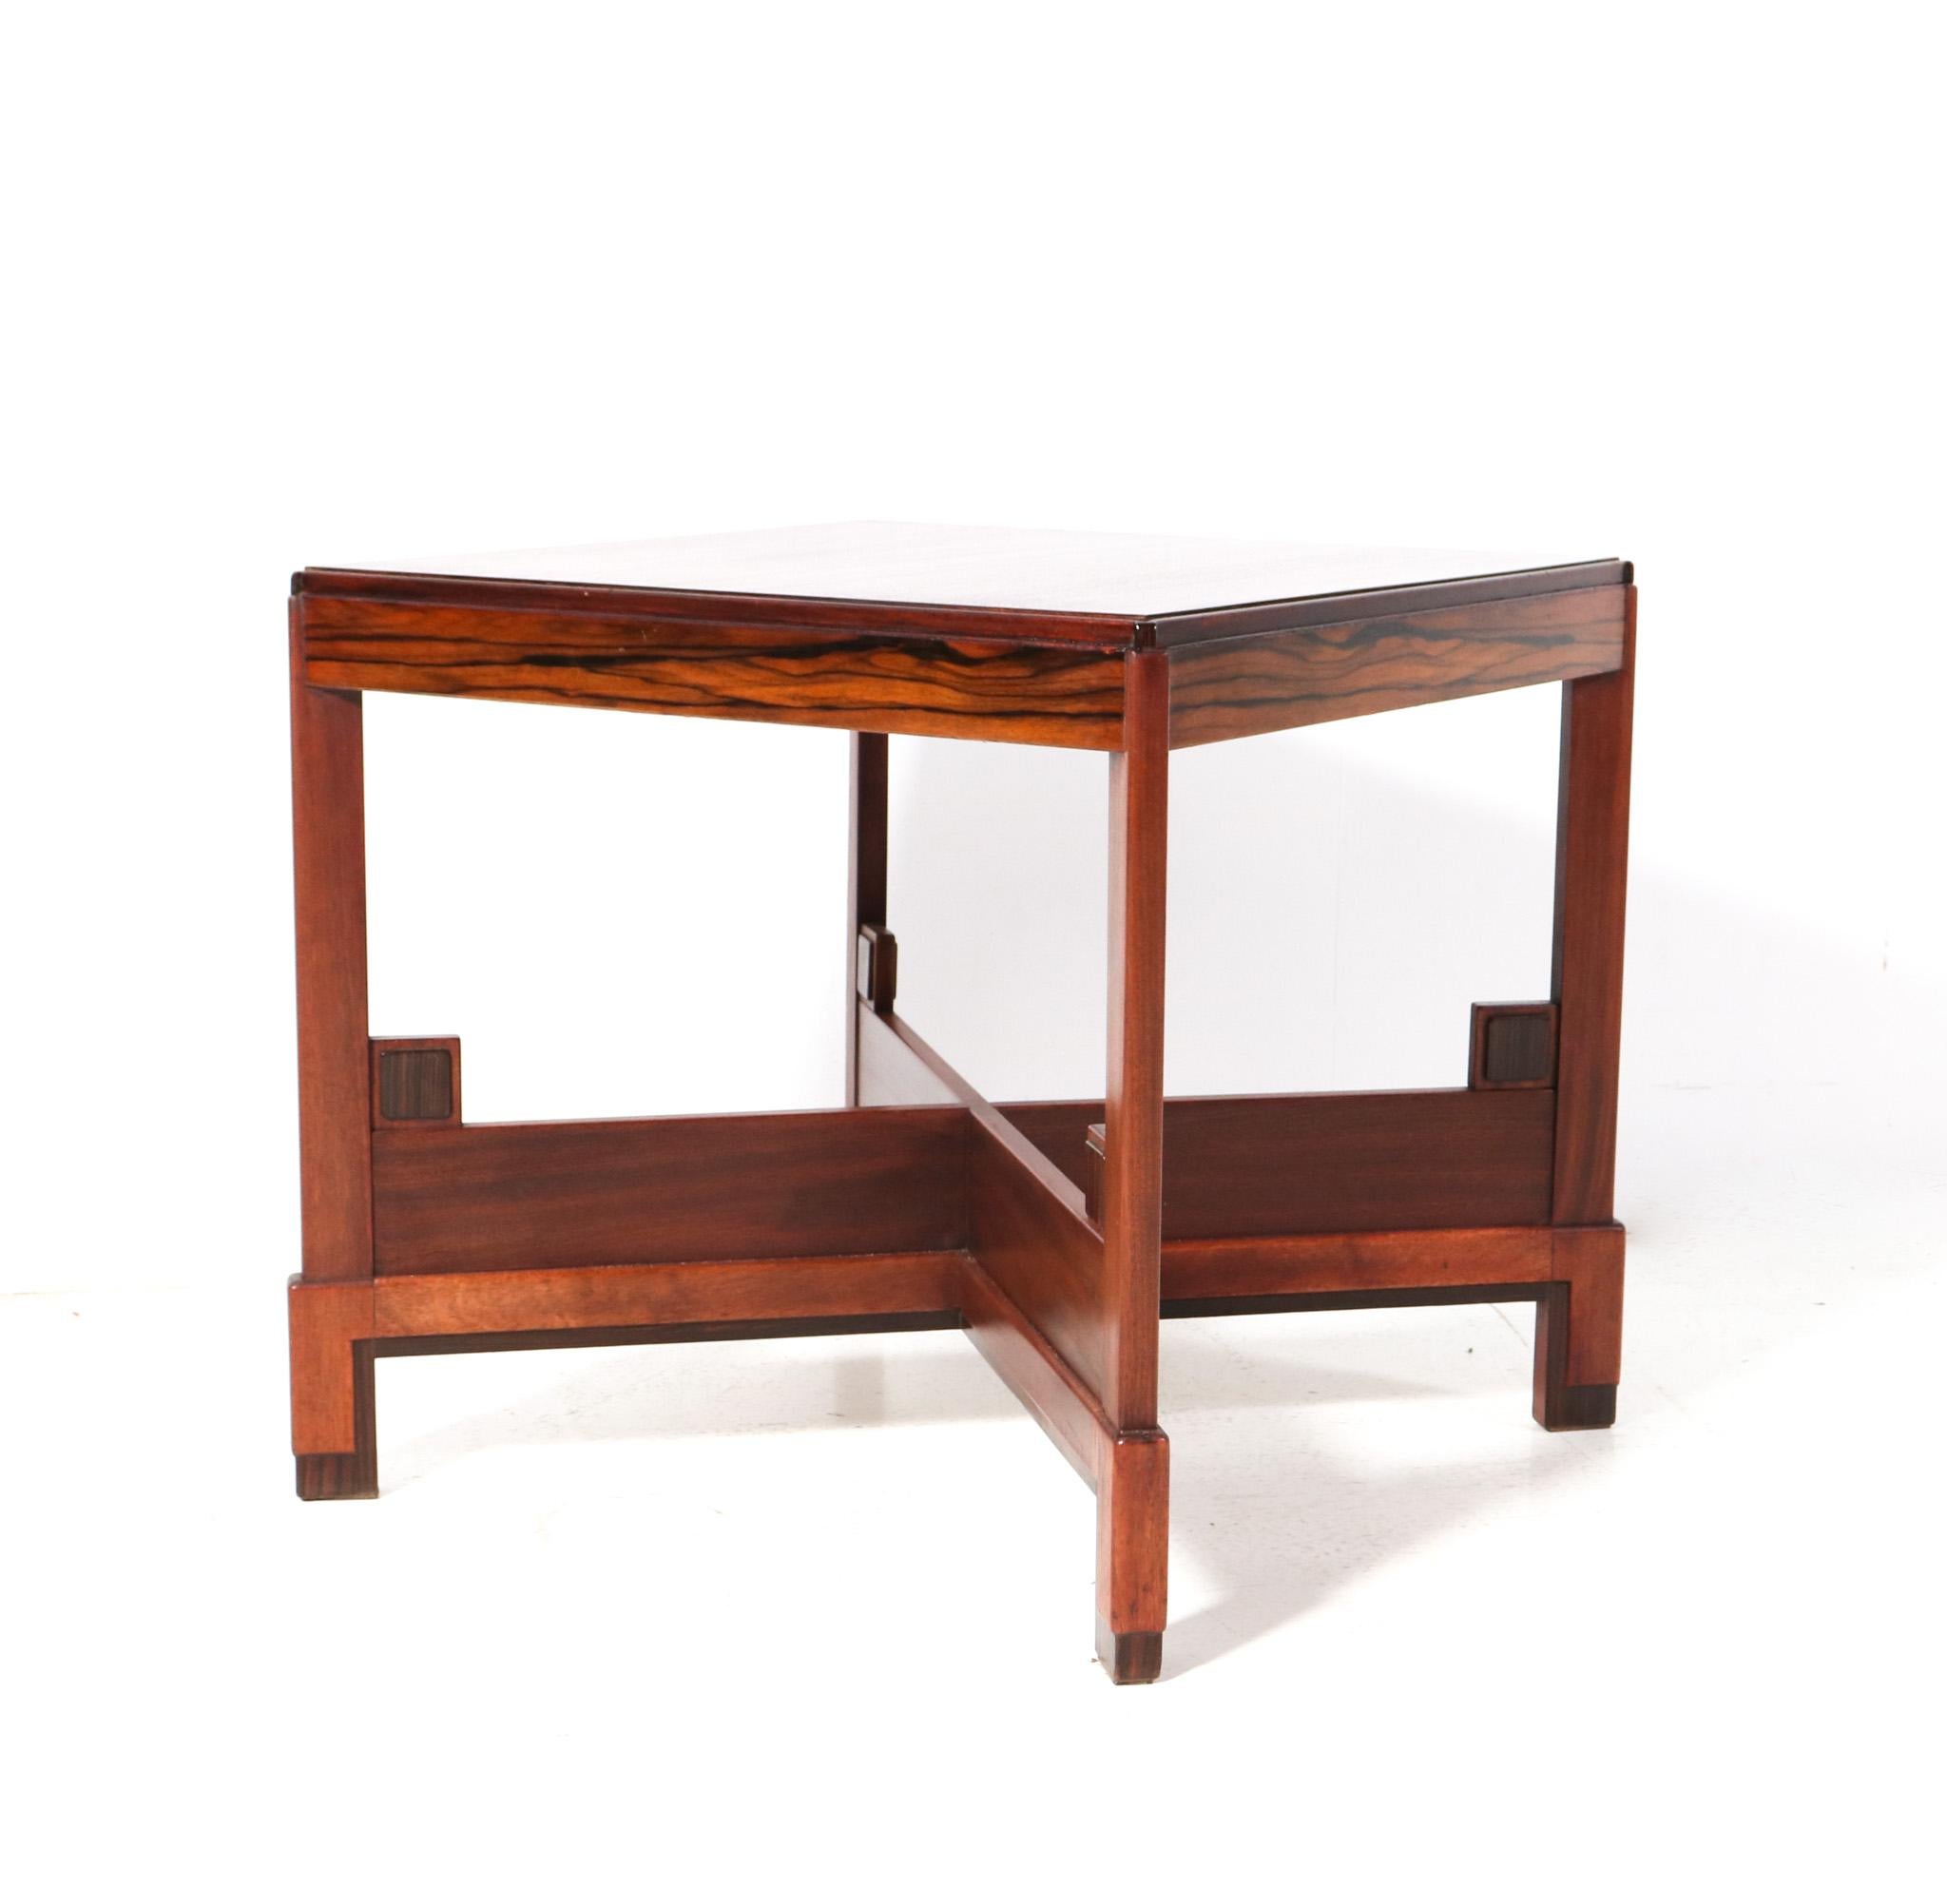 Dutch Walnut Art Deco Modernist Coffee table or Cocktail table, 1920s For Sale